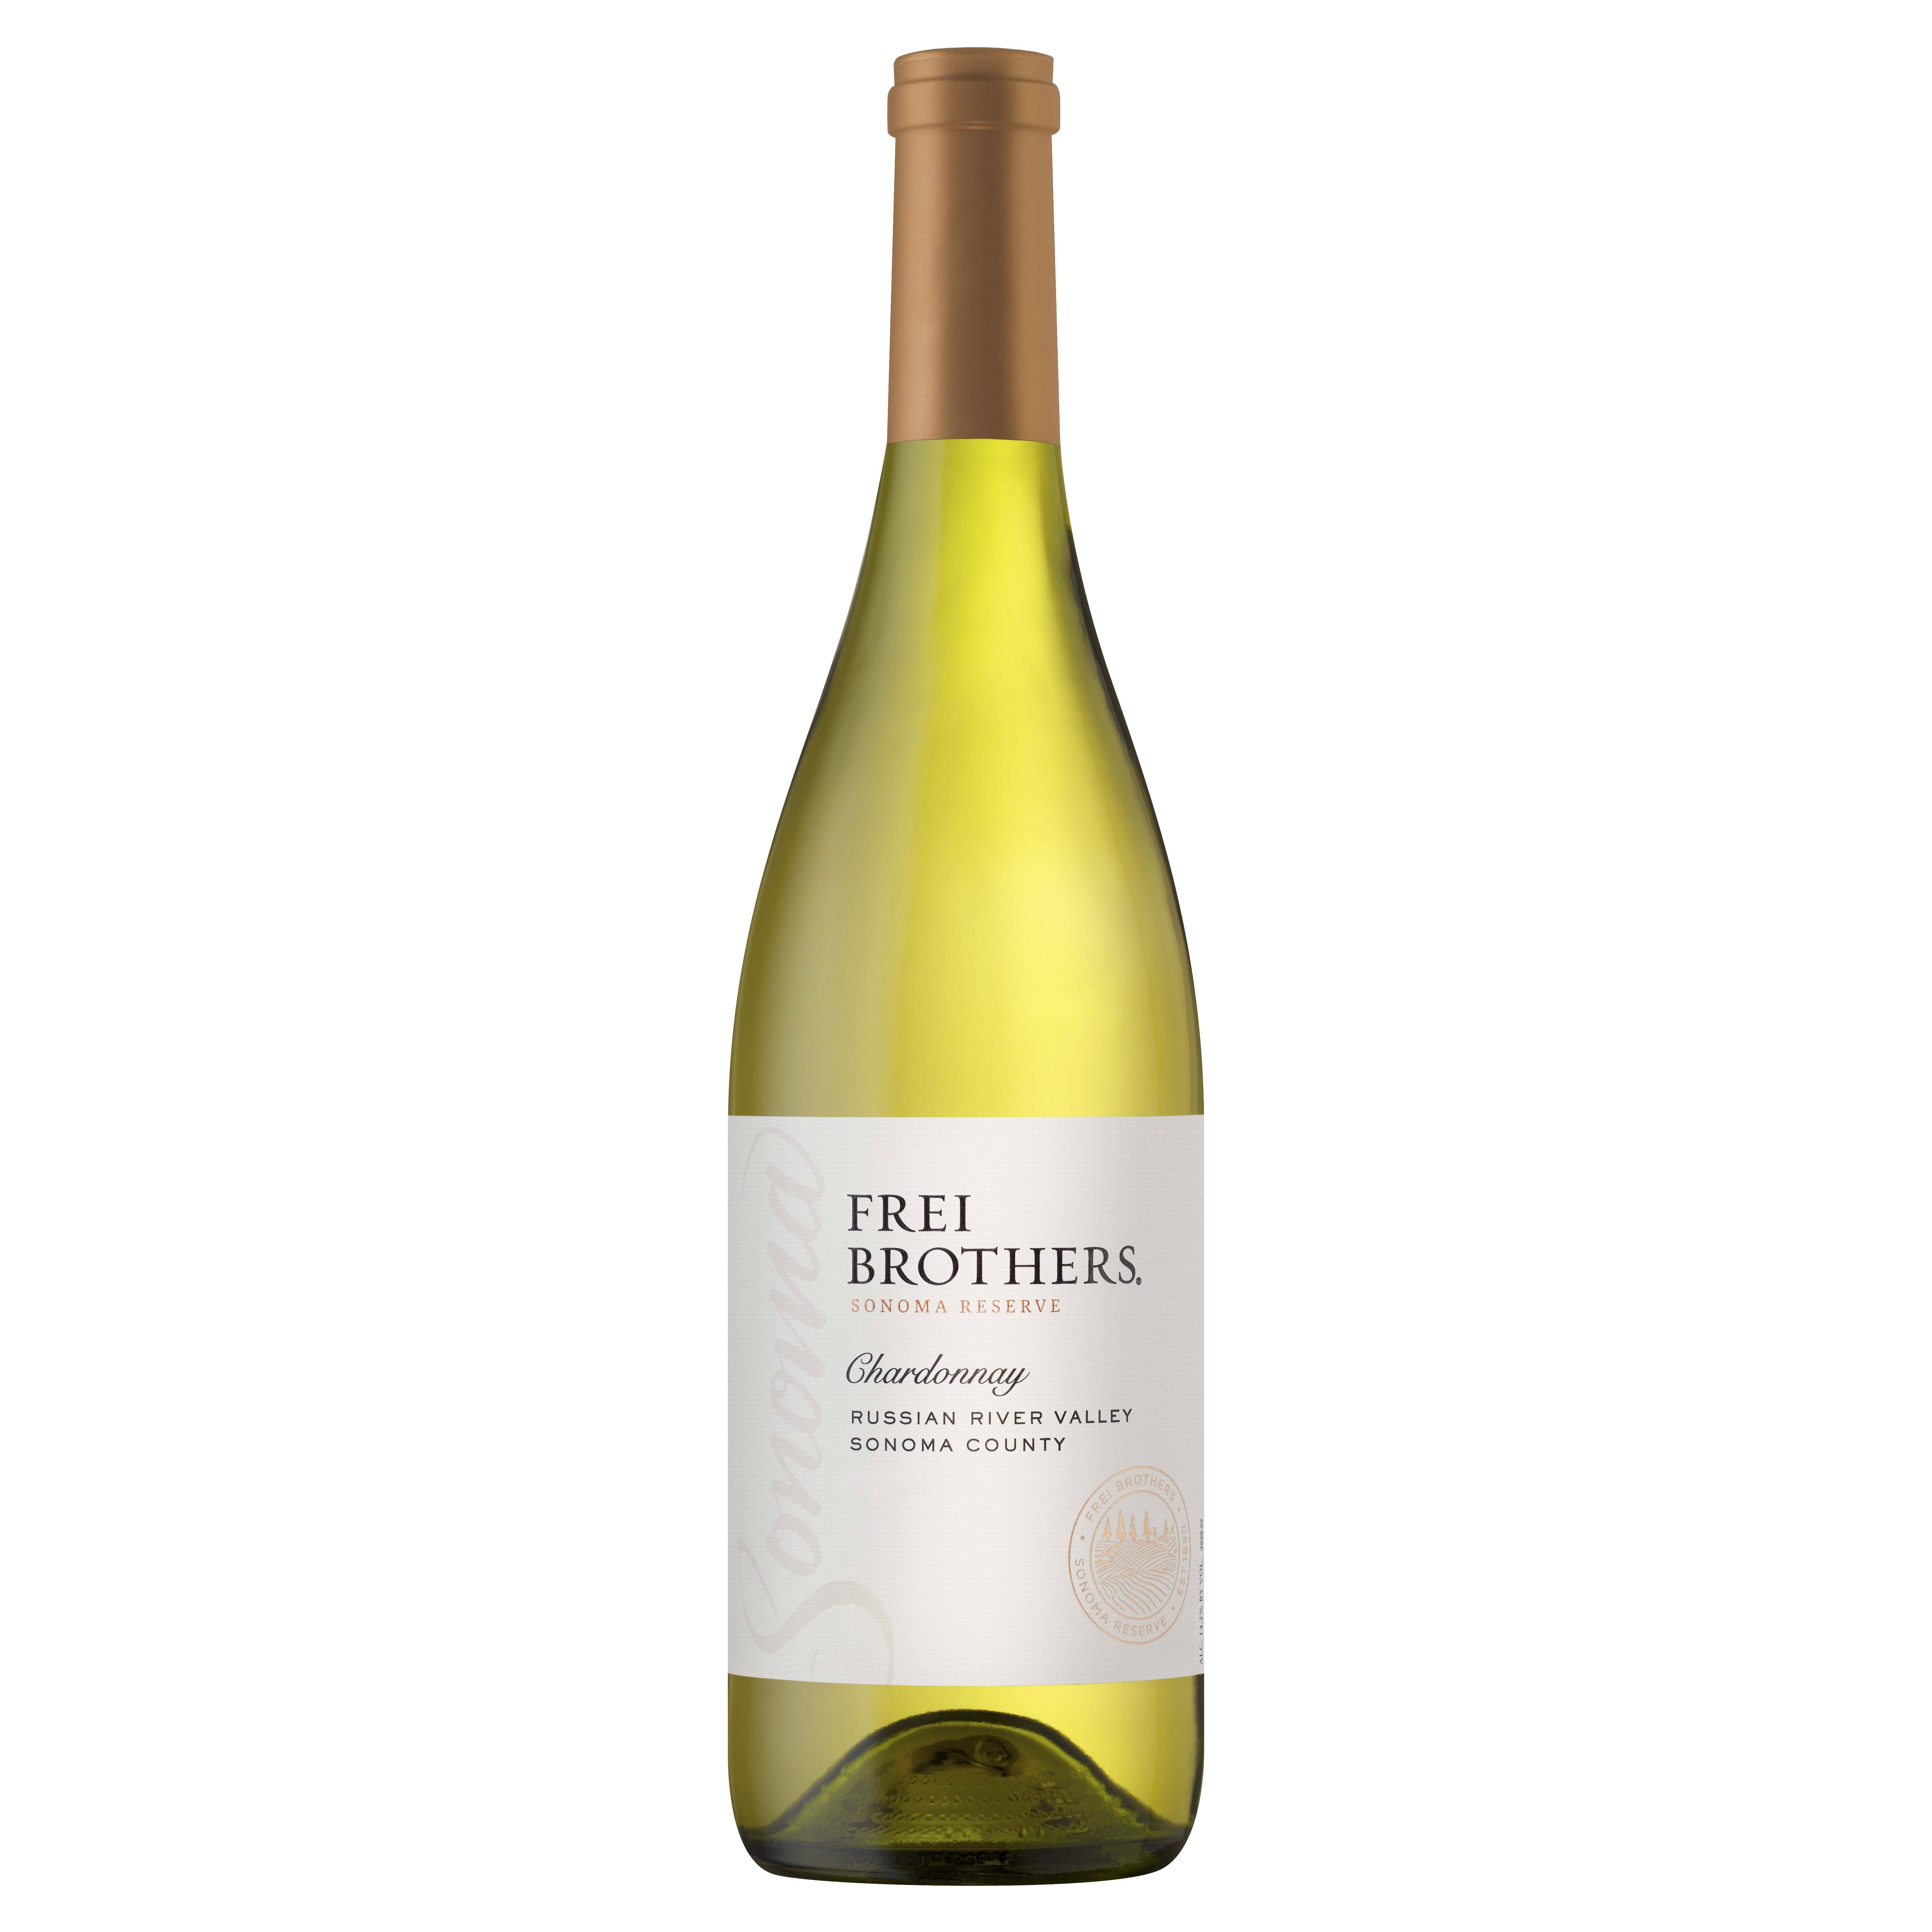 Frei Brothers Sonoma Reserve Chardonnay, Russian River Valley, Sonoma County, 2017 - 750 ml